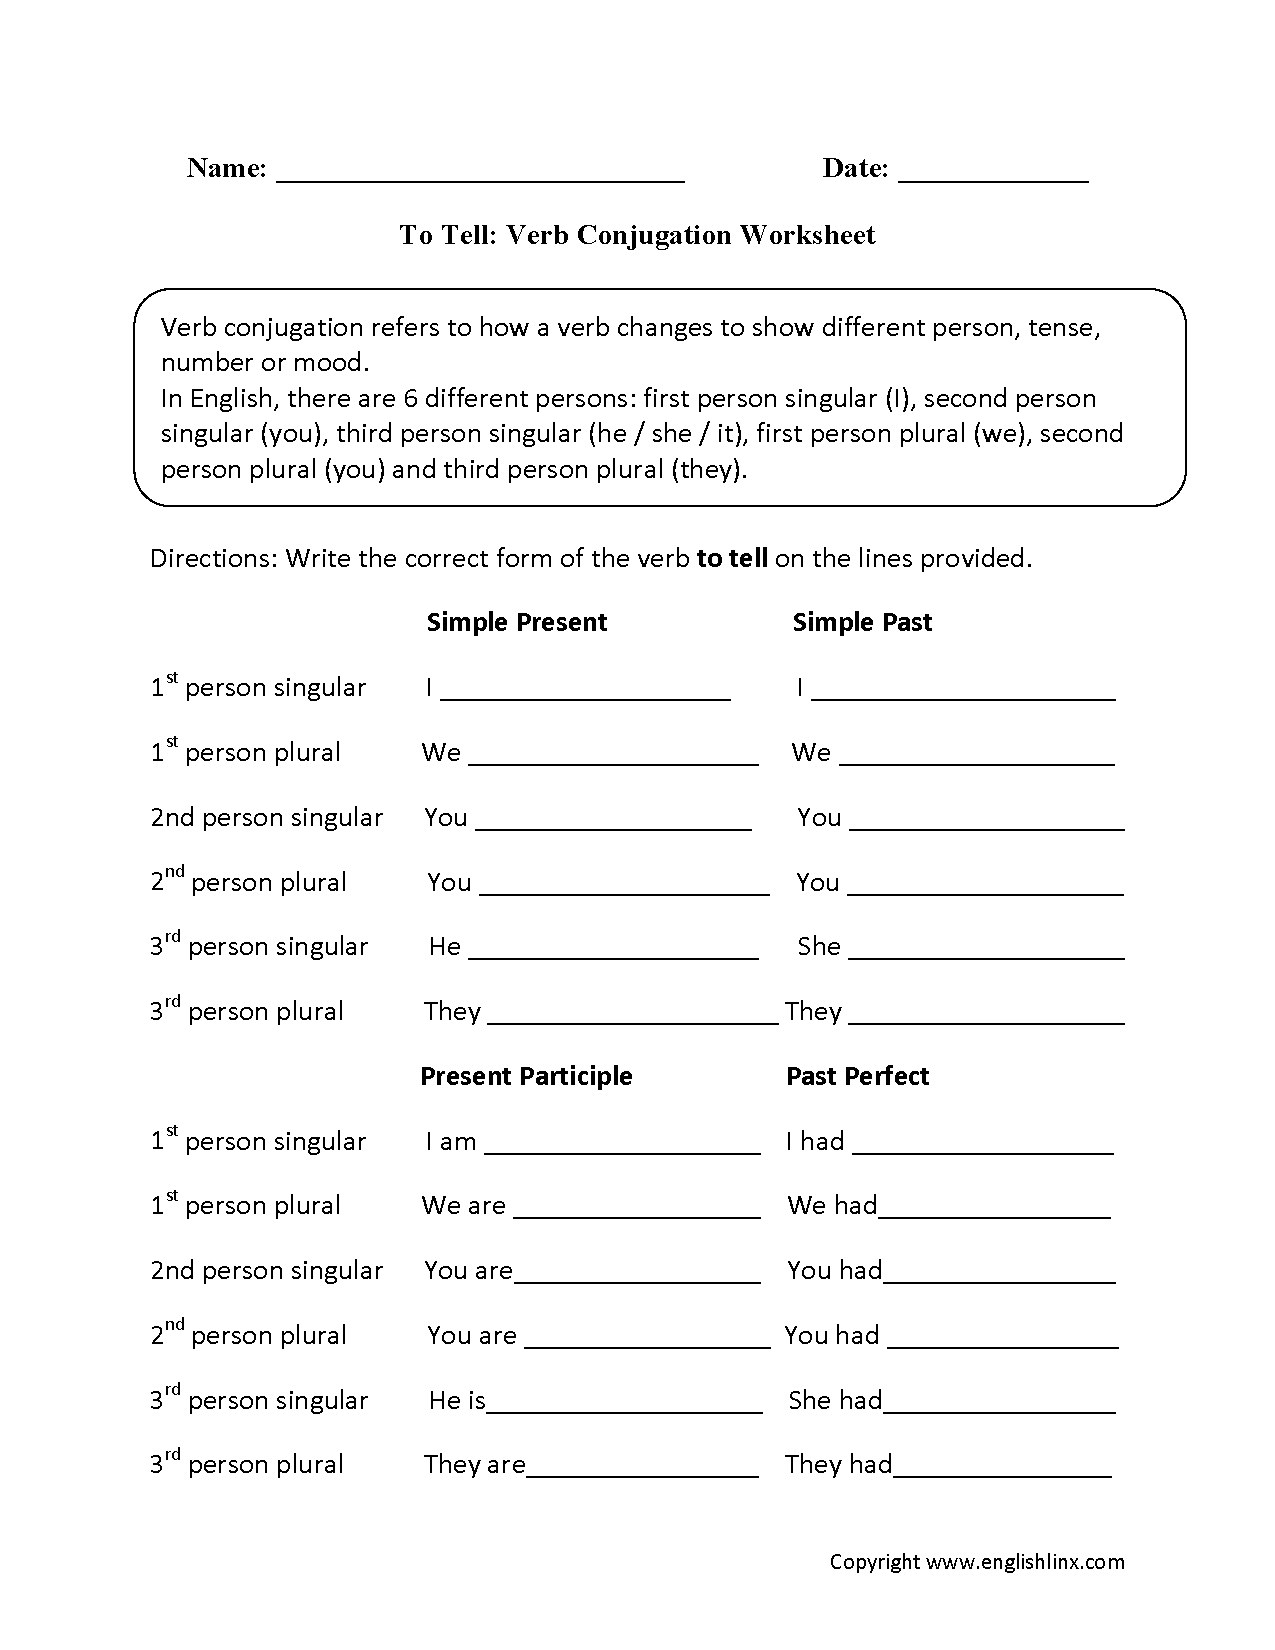 To Tell Verb Conjugation Worksheets